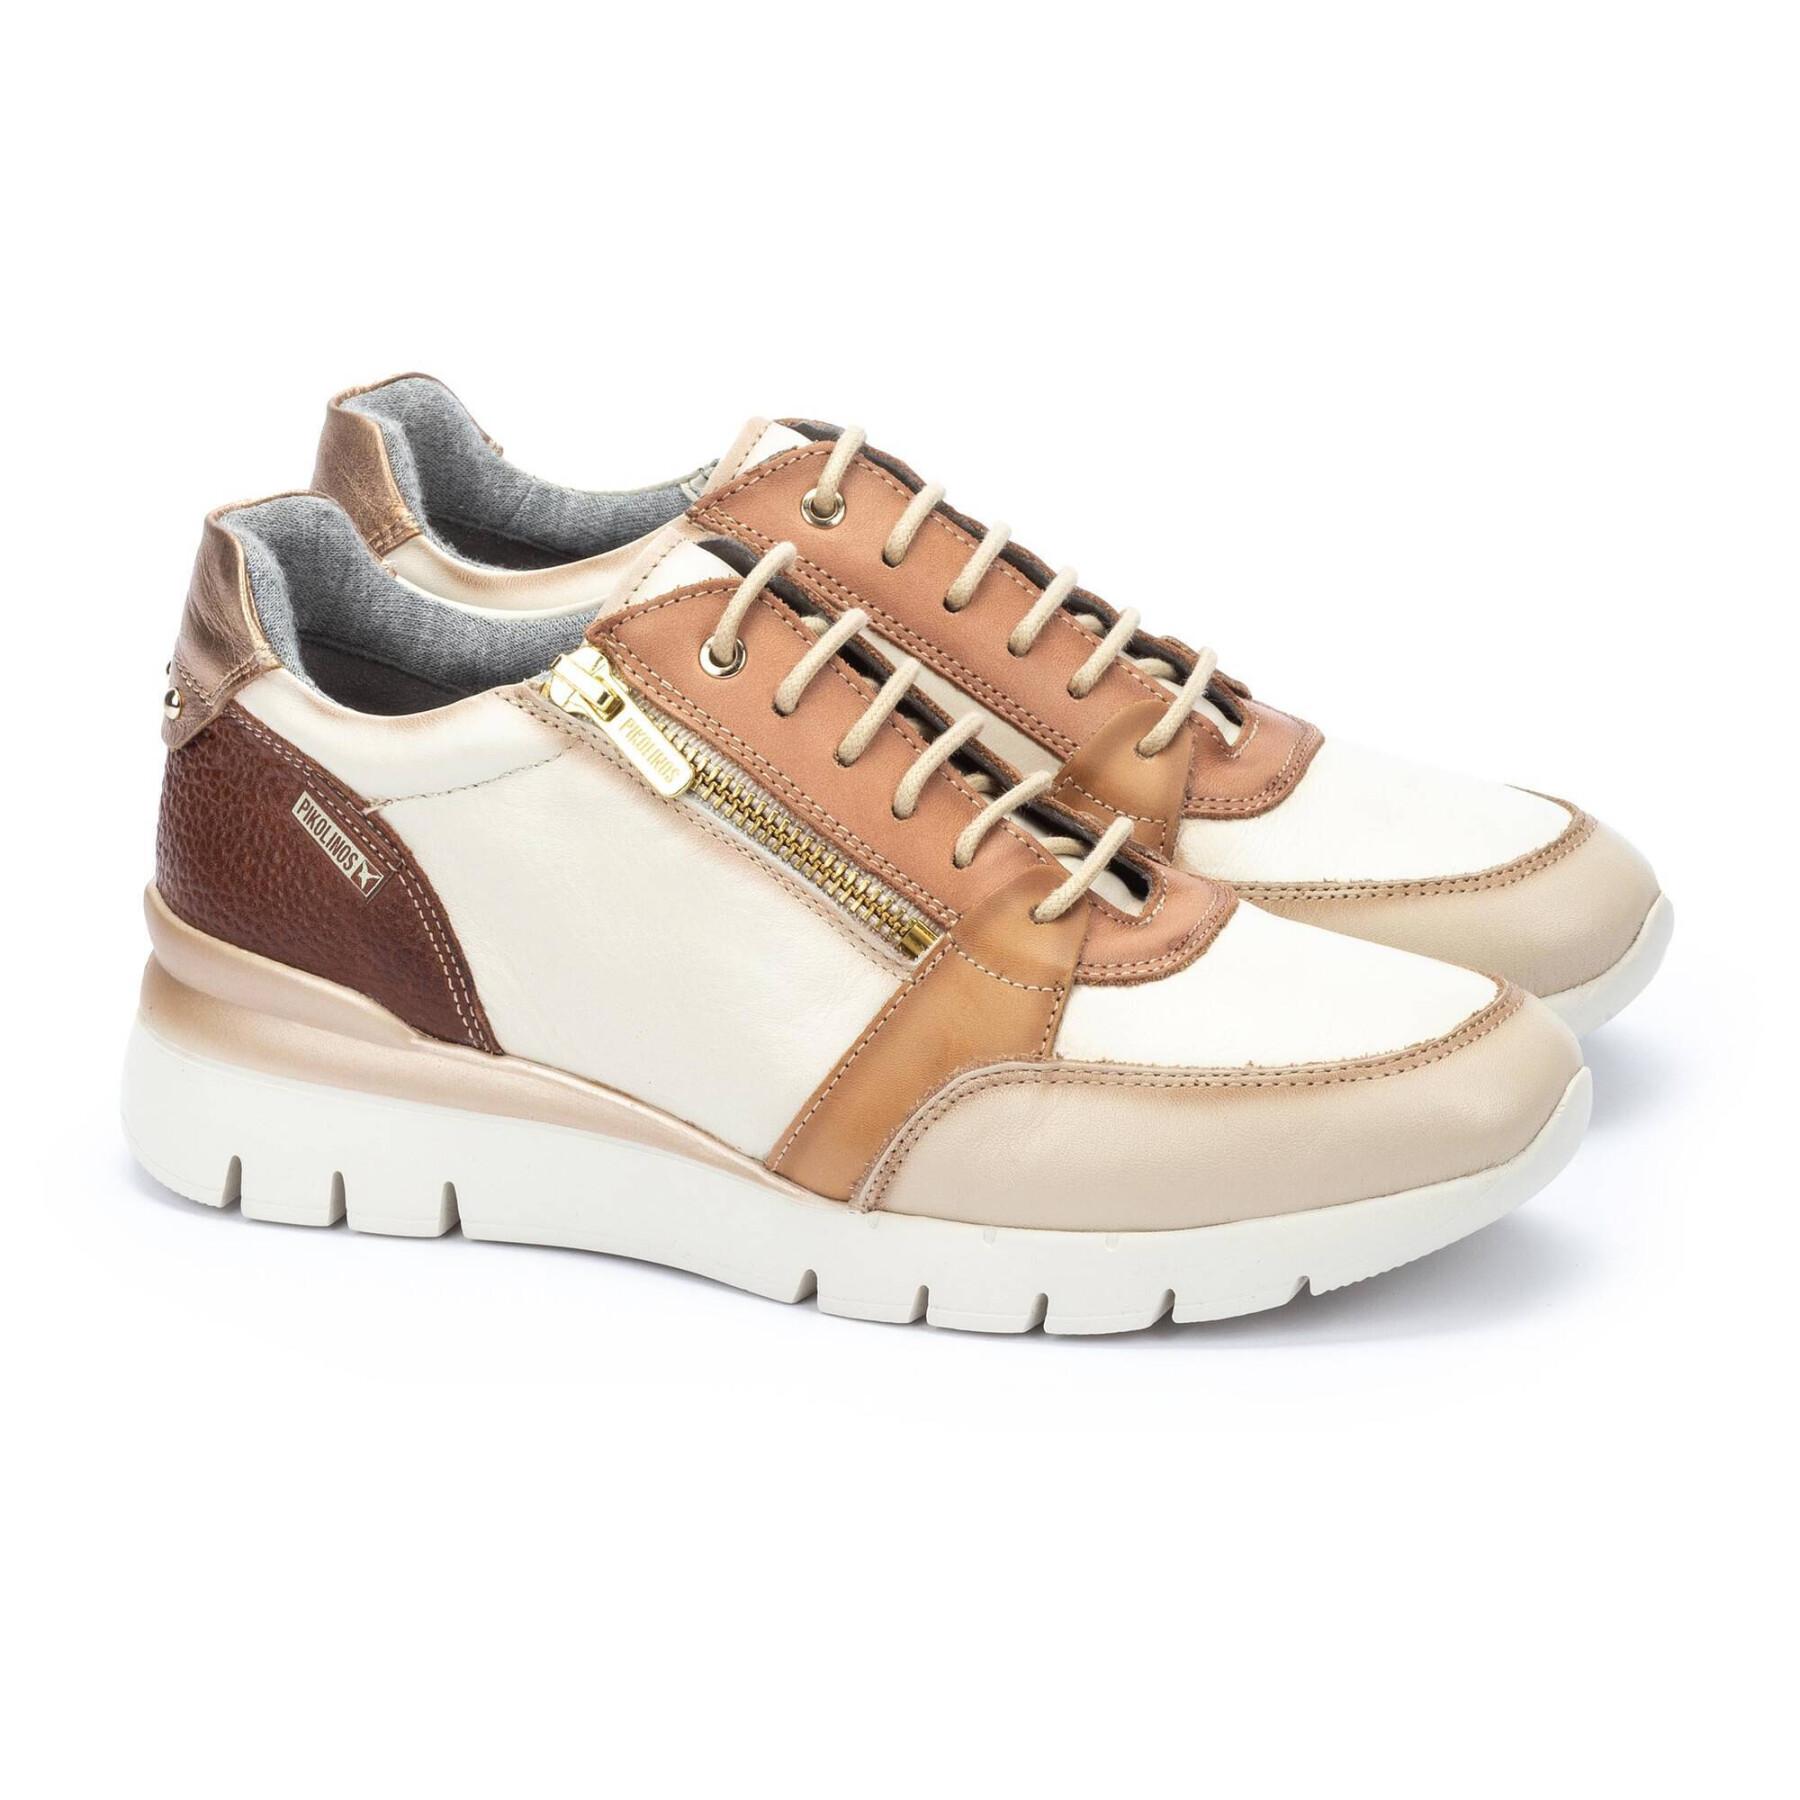 Women's sneakers Pikolinos Cantabria W4R-6718C4